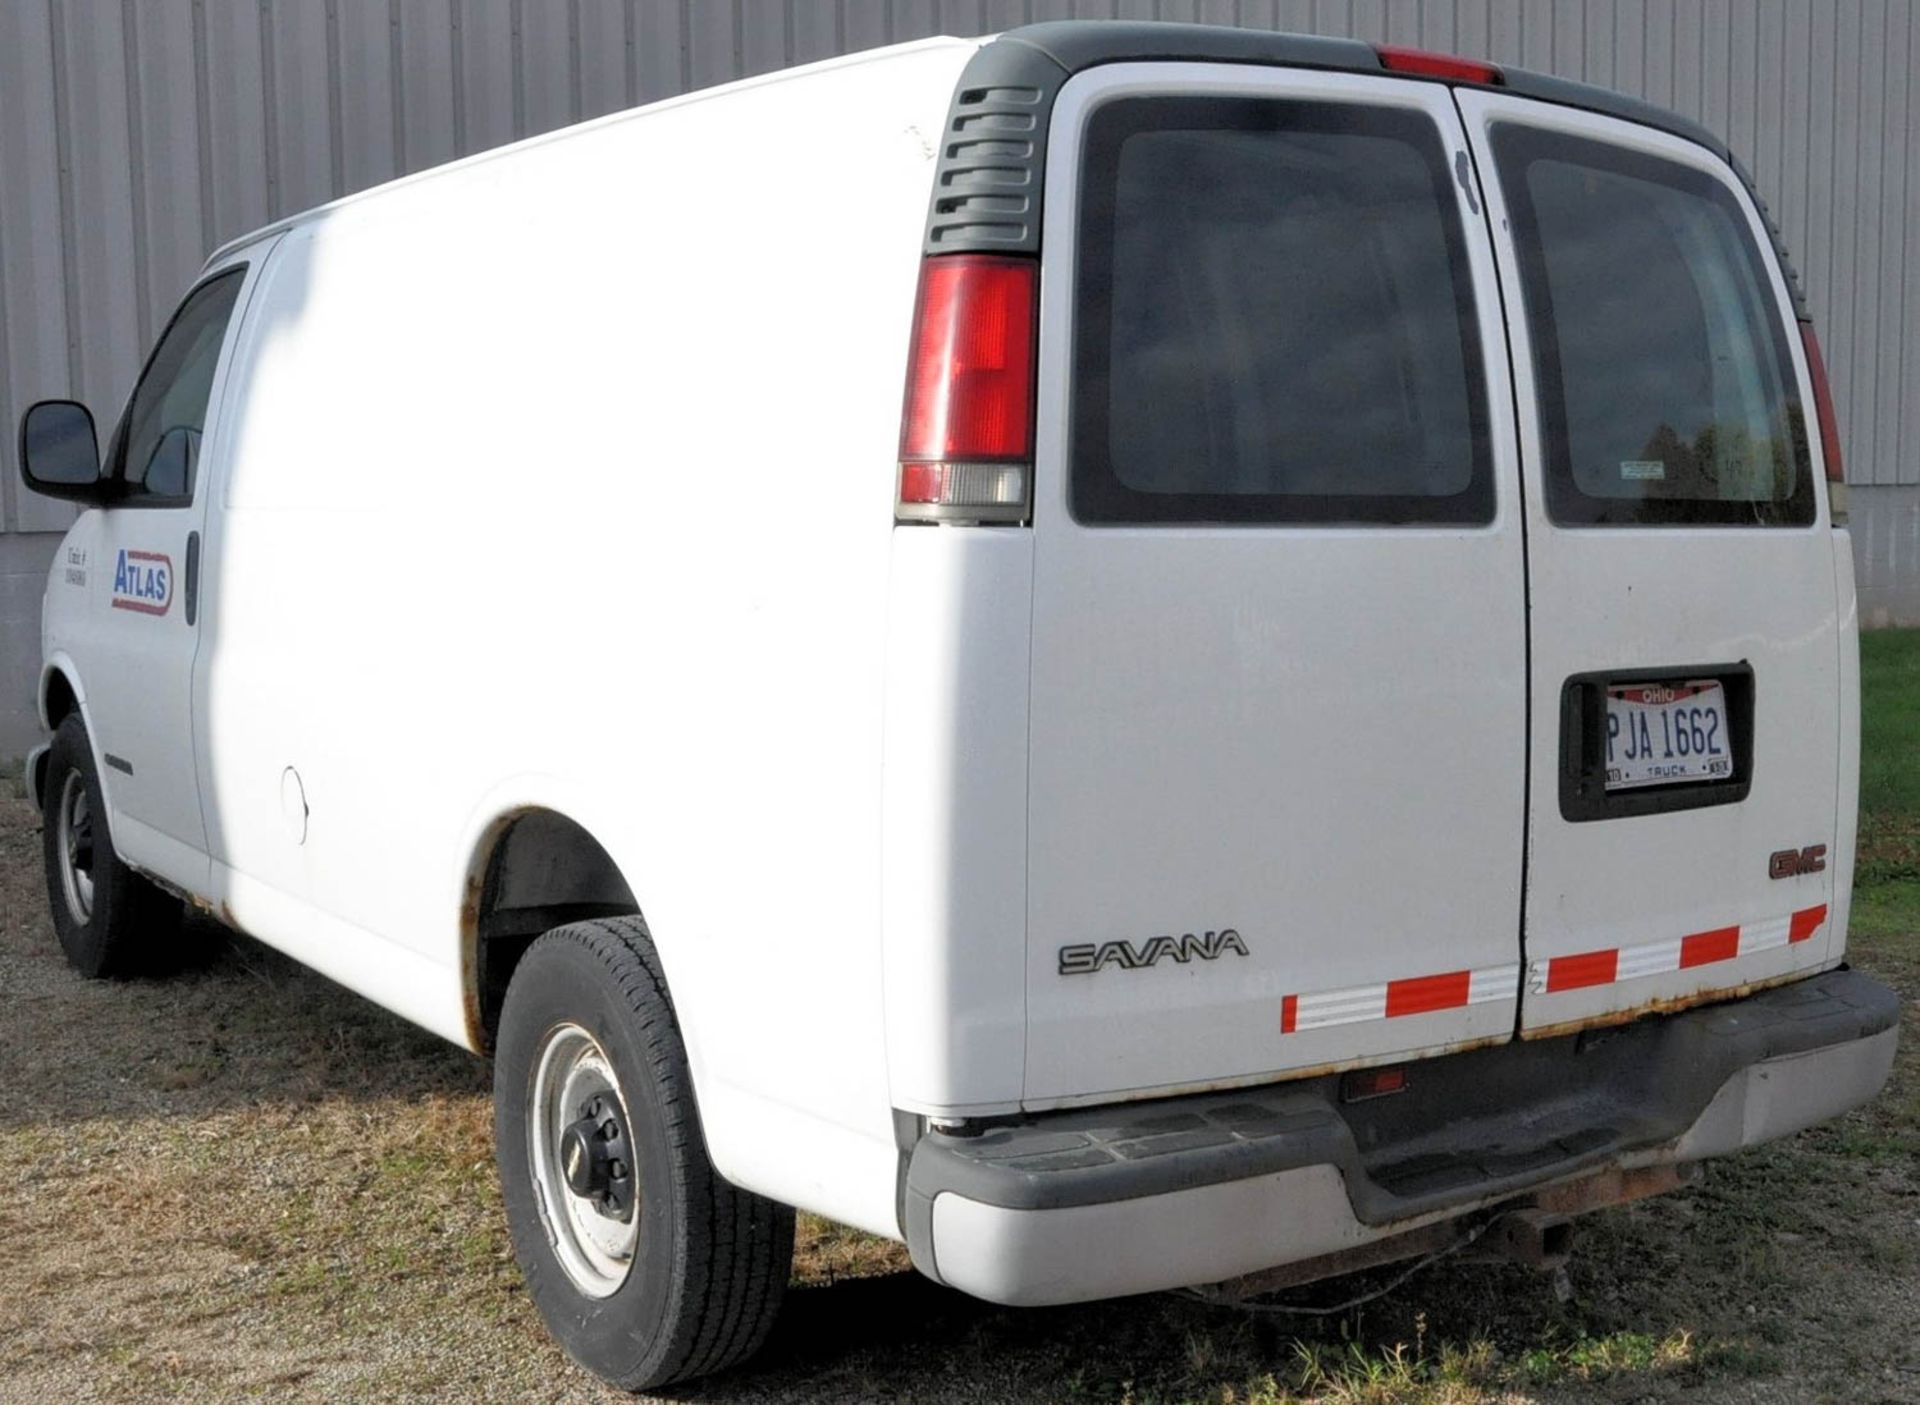 2002 CHEVY 3500 CARGO VAN, VIN 1GCHG35R621191122, GAS ENGINE, AUTOMATIC TRANSMISSION, 176,715 MILES, - Image 4 of 5